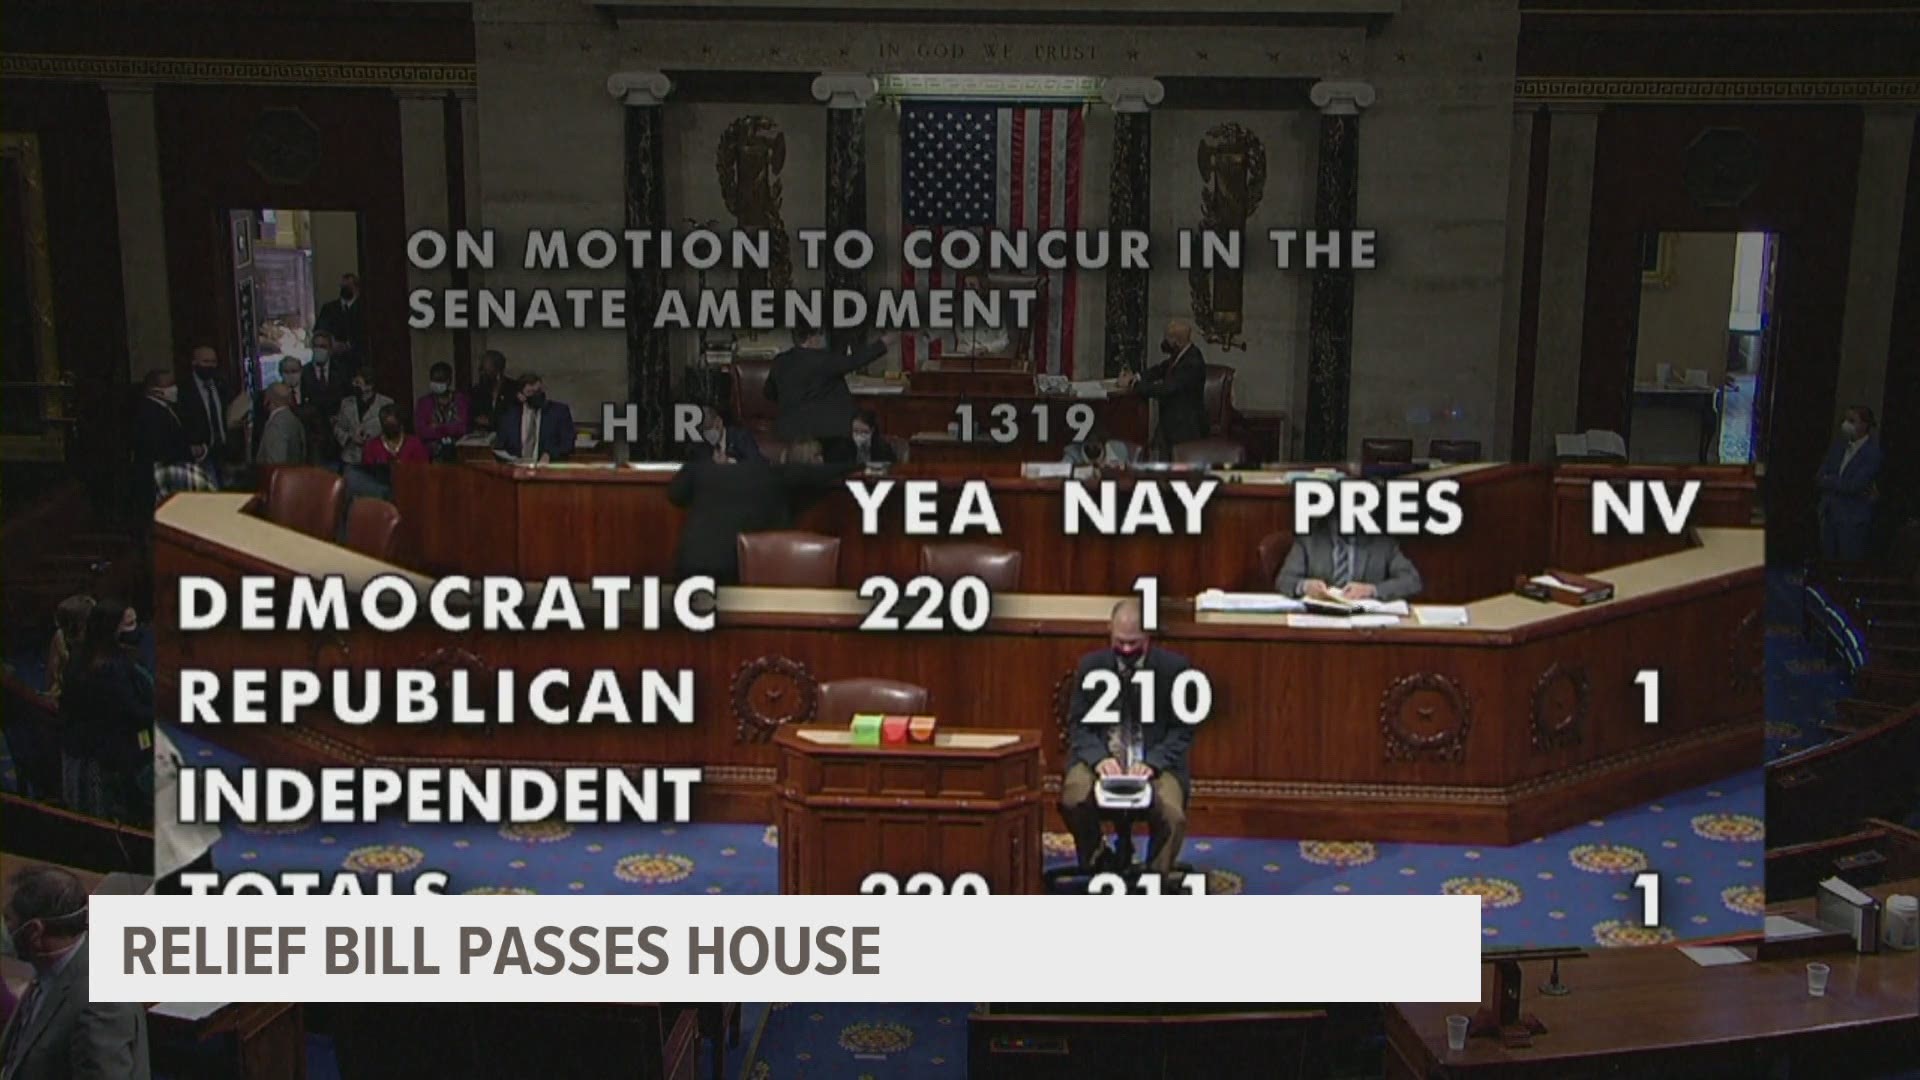 The bill passed strictly on party lines, 220-211 with Democrat support.